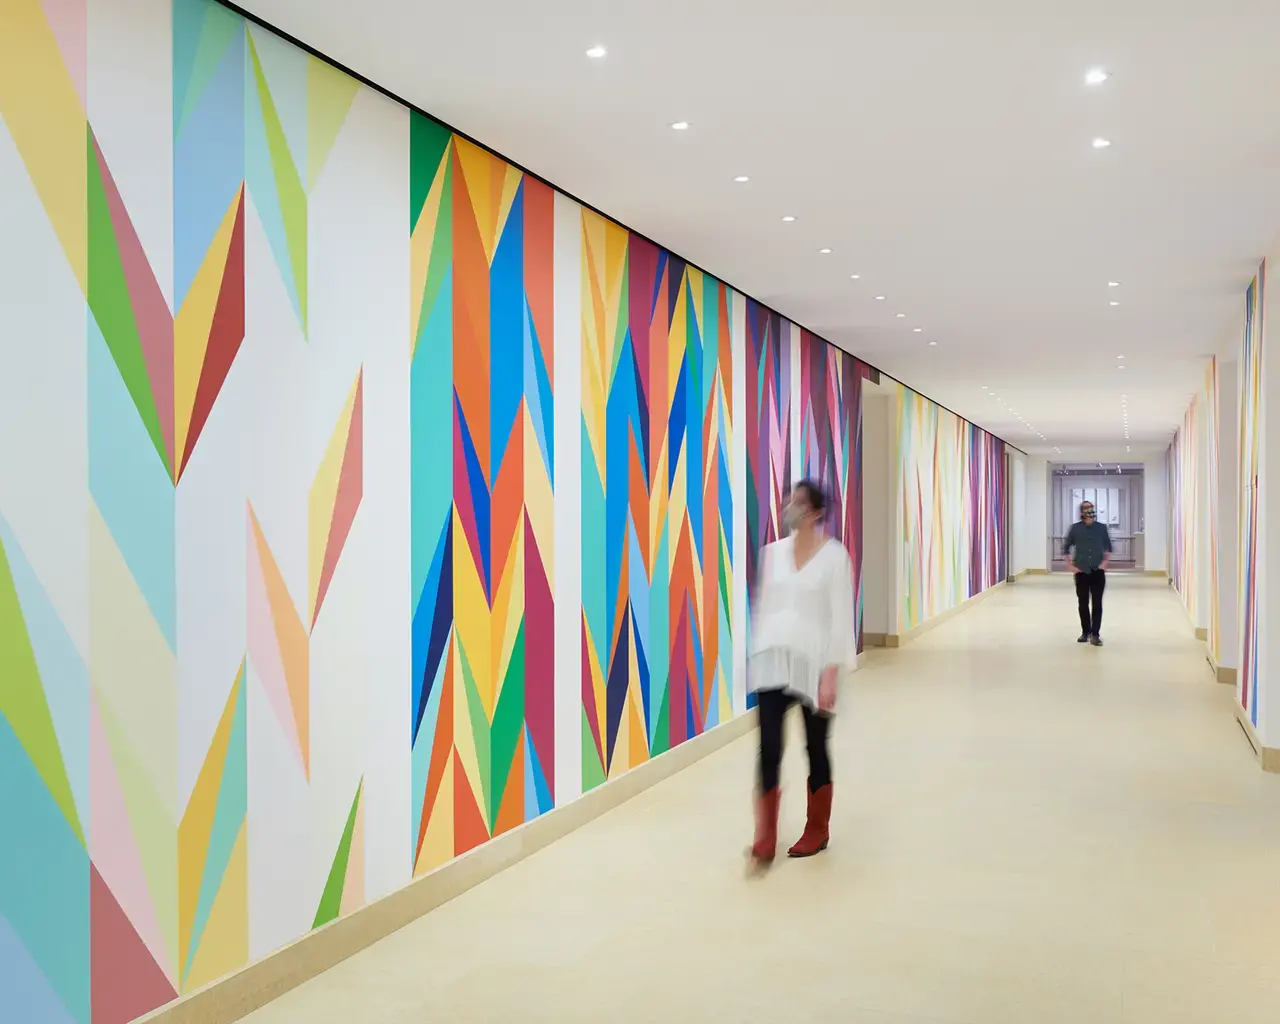 Odili Donald Odita, Walls of Change, 2021; acrylic latex paint on wall, 128’. Commissioned by the Philadelphia Museum of Art with funds contributed by John Alchin and Hal Marryatt. Courtesy of the artist and Jack Shainman Gallery. Image courtesy of the artist and the Philadelphia Museum of Art.&nbsp;